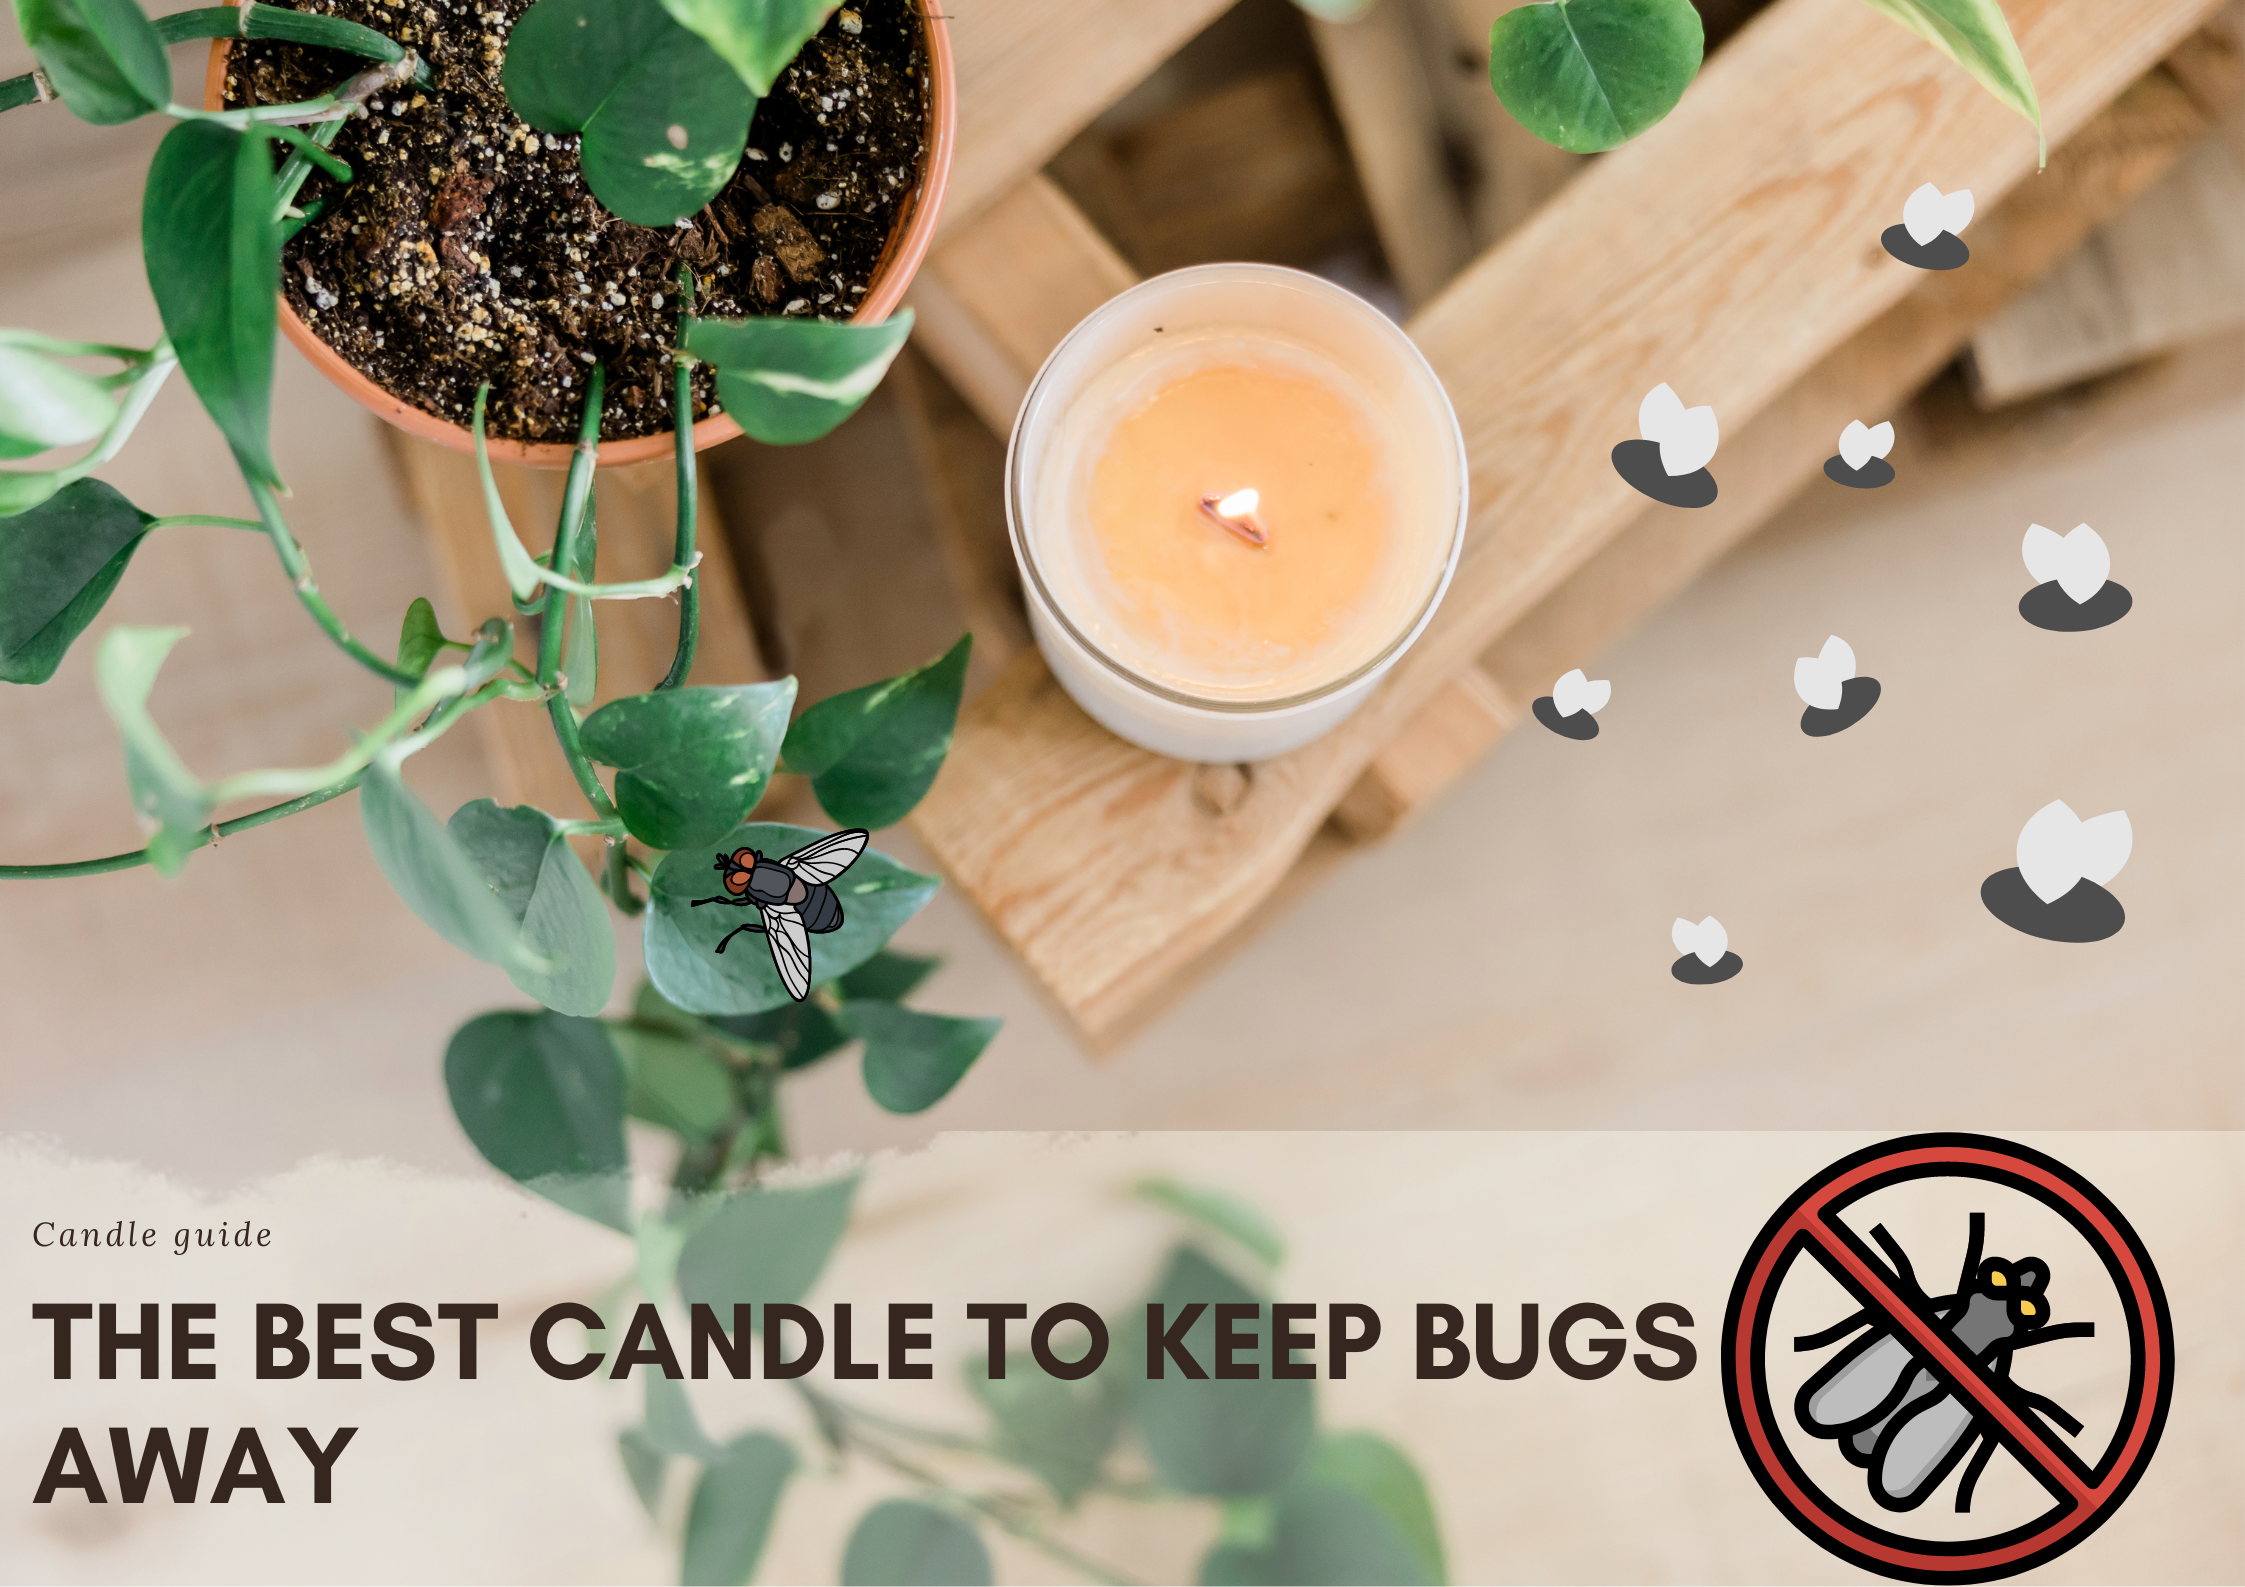 The best candle to keep bugs away